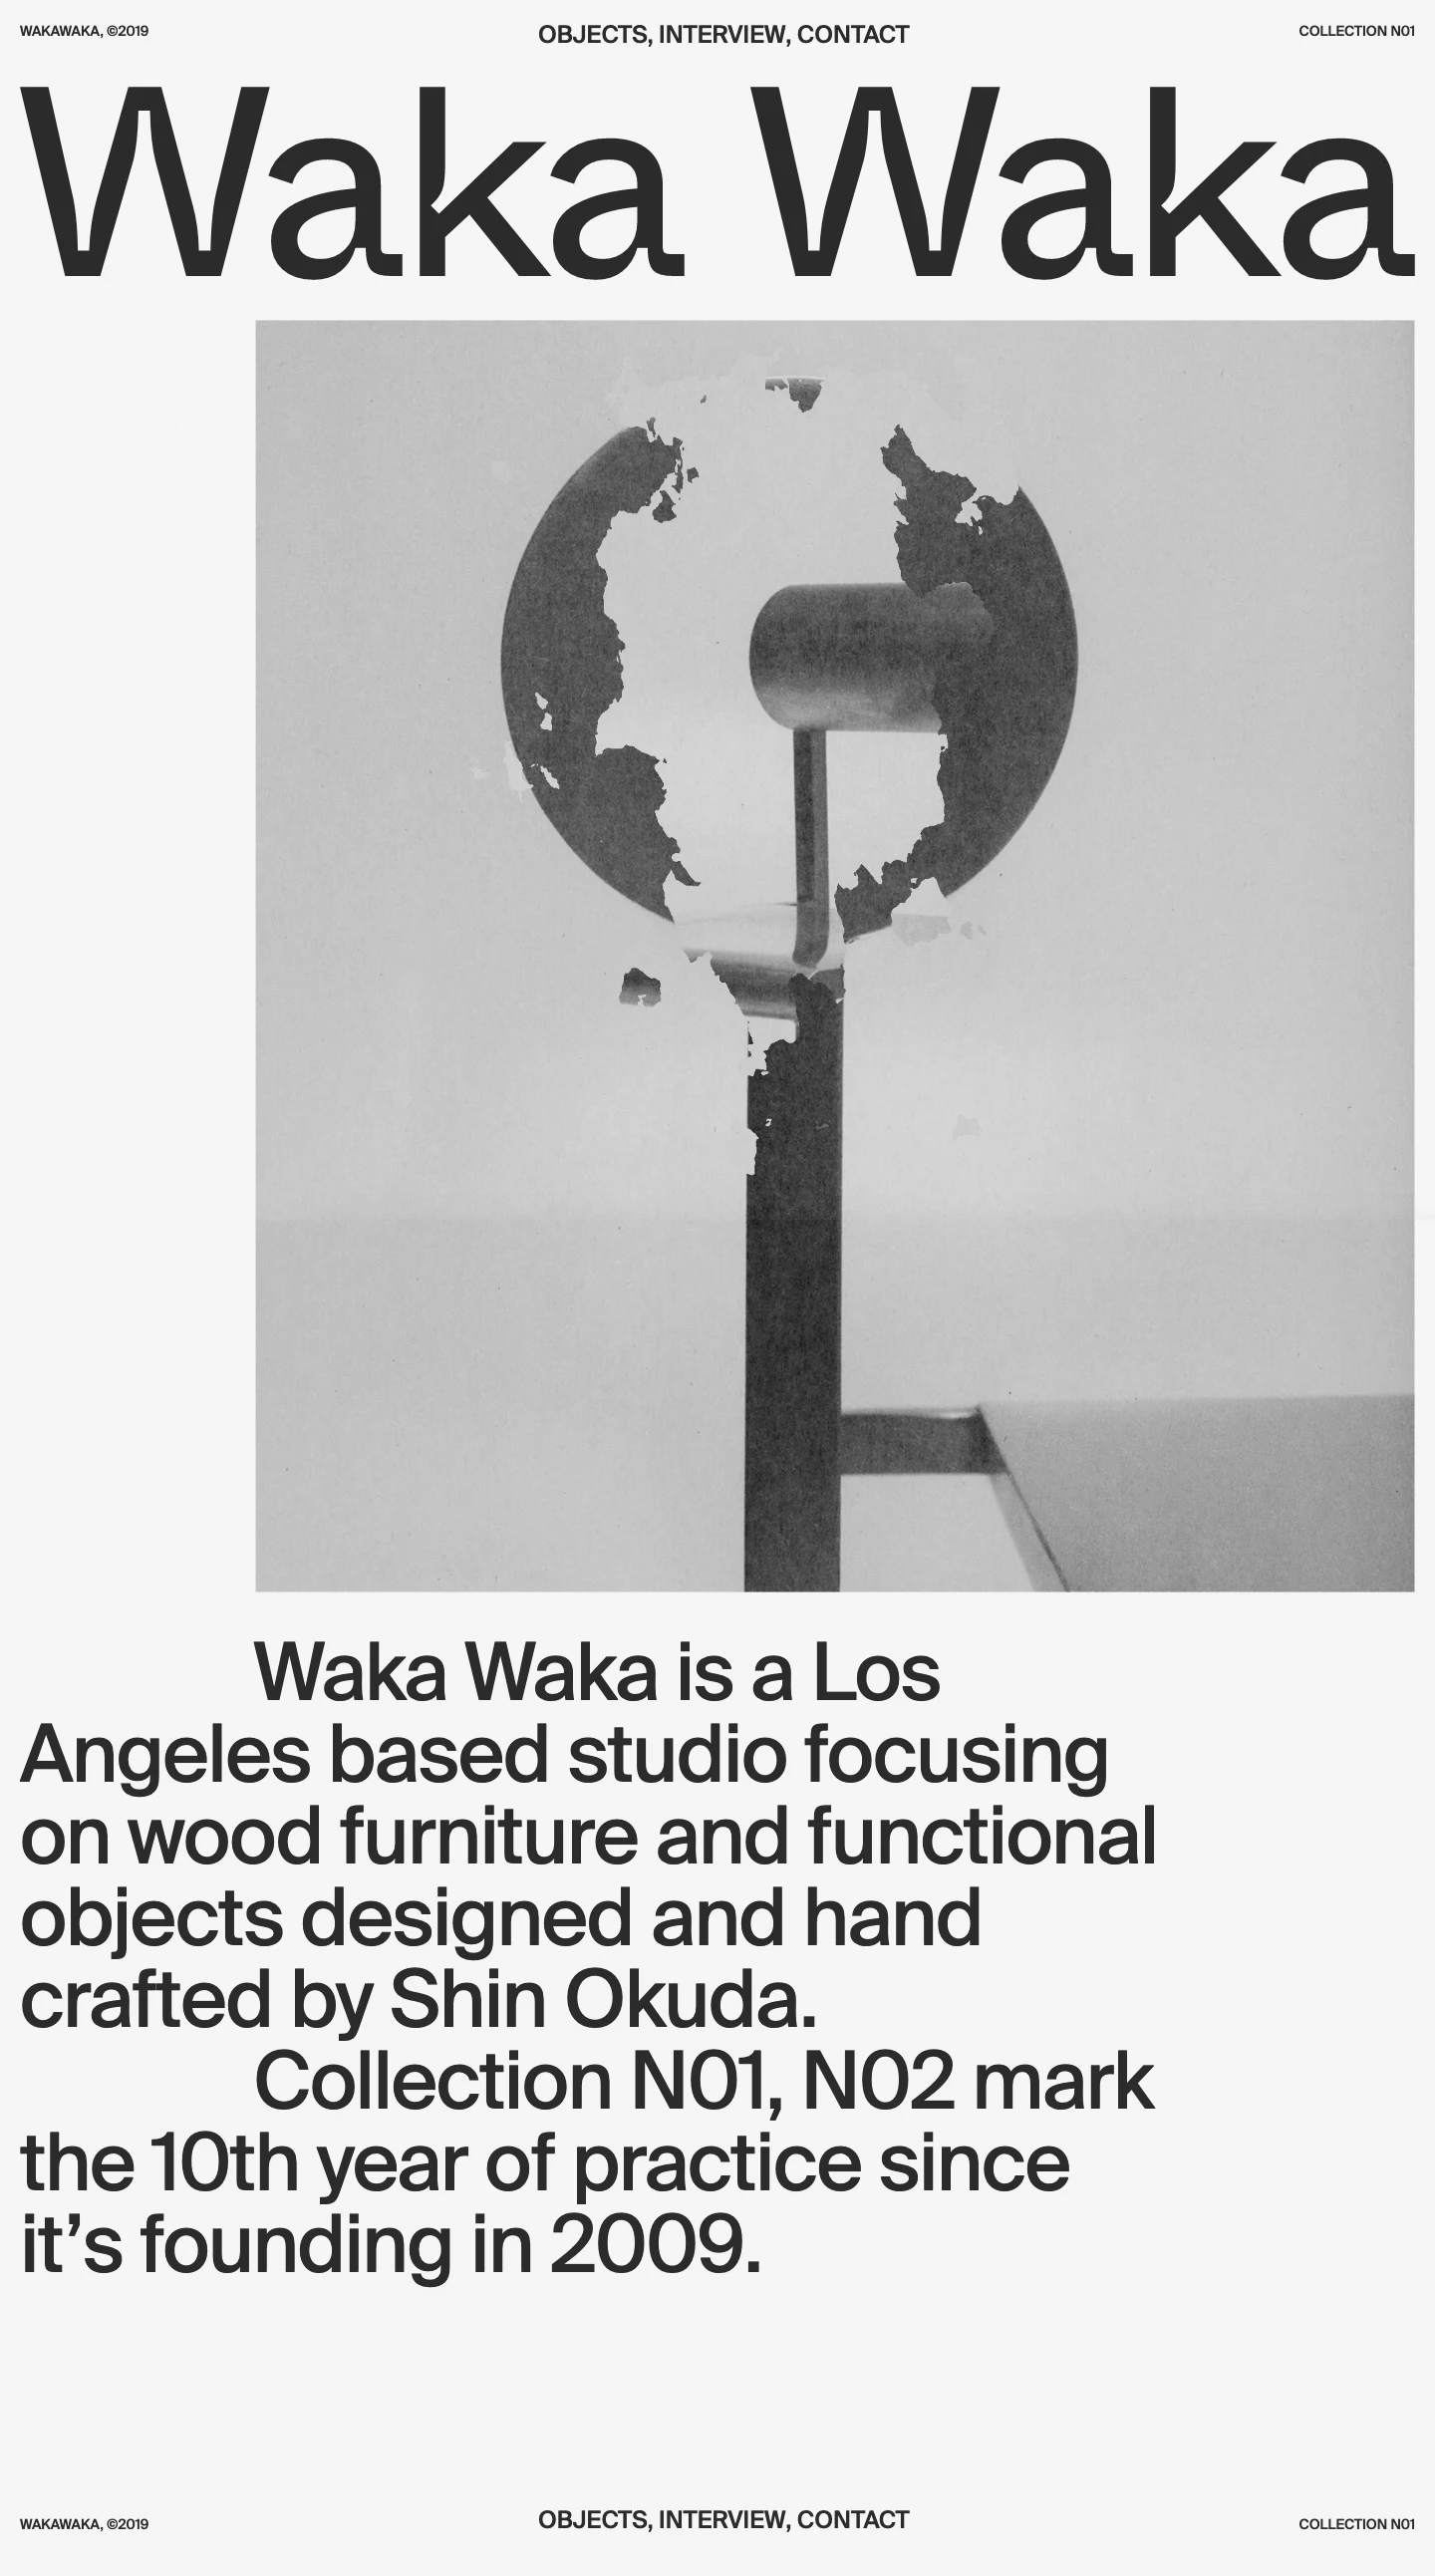 Waka Waka Landing Page Example: Waka Waka is a Los Angeles based studio focusing on wood furniture and functional objects designed and hand crafted by Shin Okuda. Collection N01 & N02 mark the 10th year of practice since it’s founding.